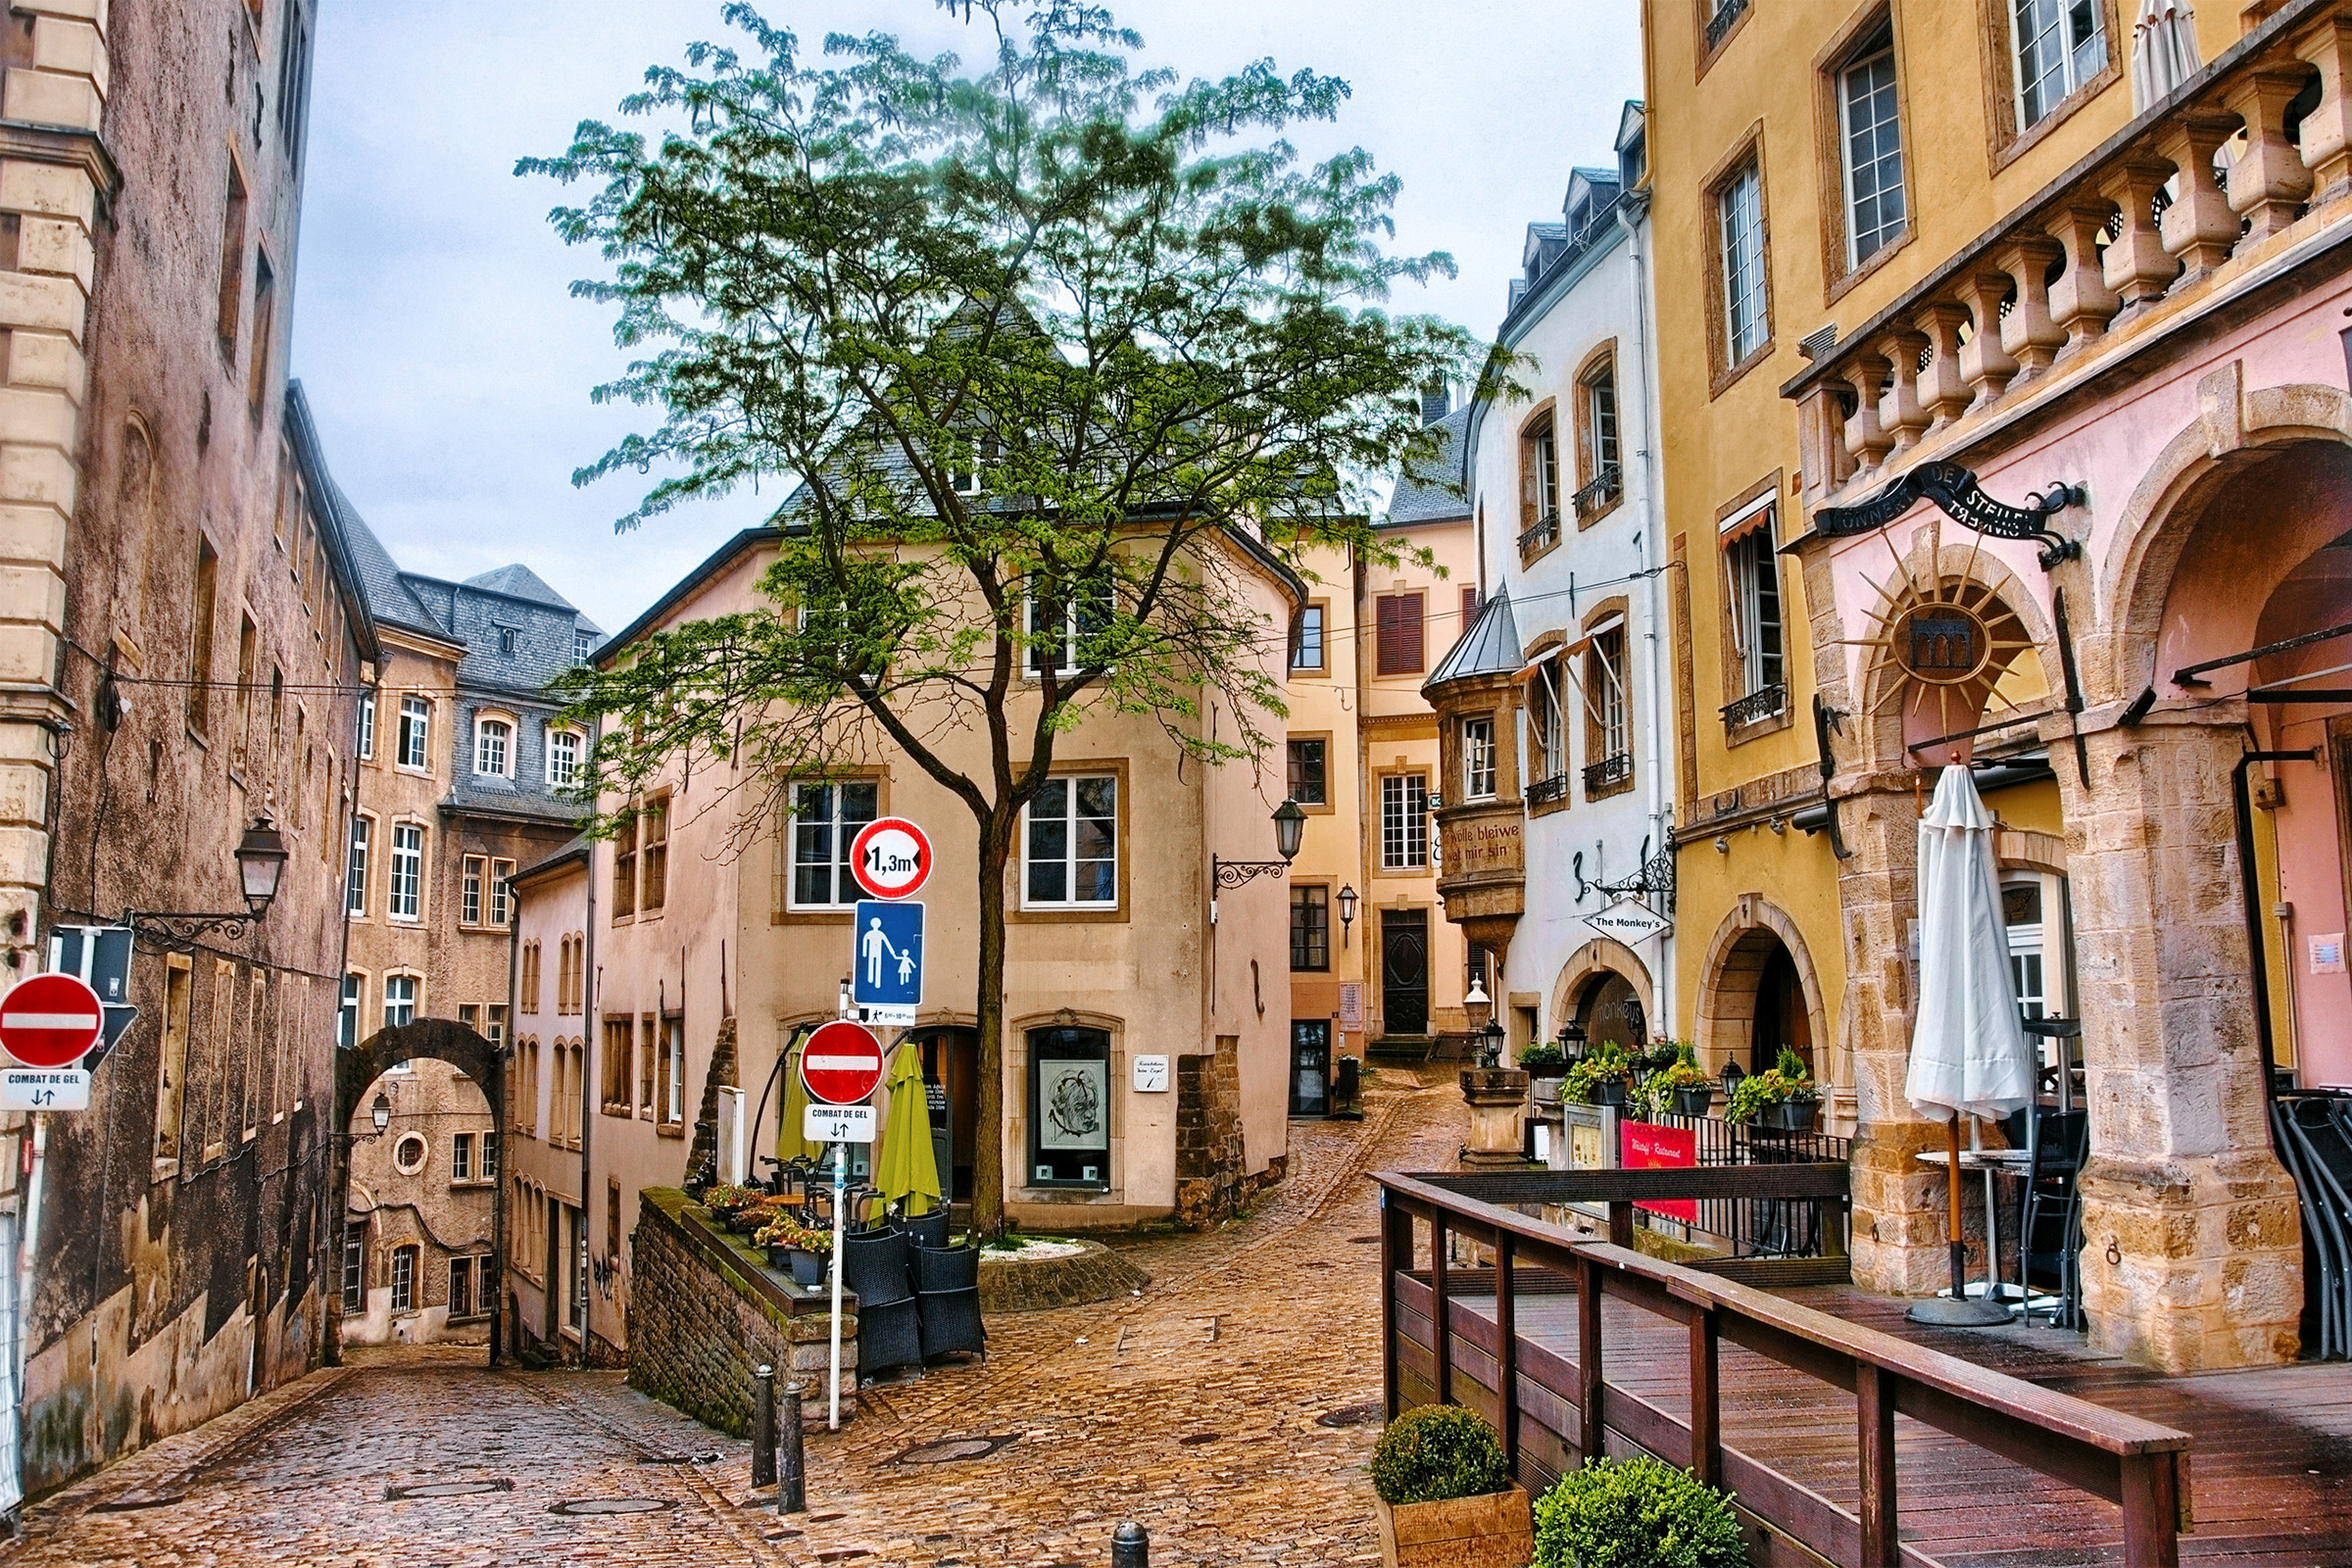 Narrow medieval street with cafes in Luxembourg city, Luxembourg.